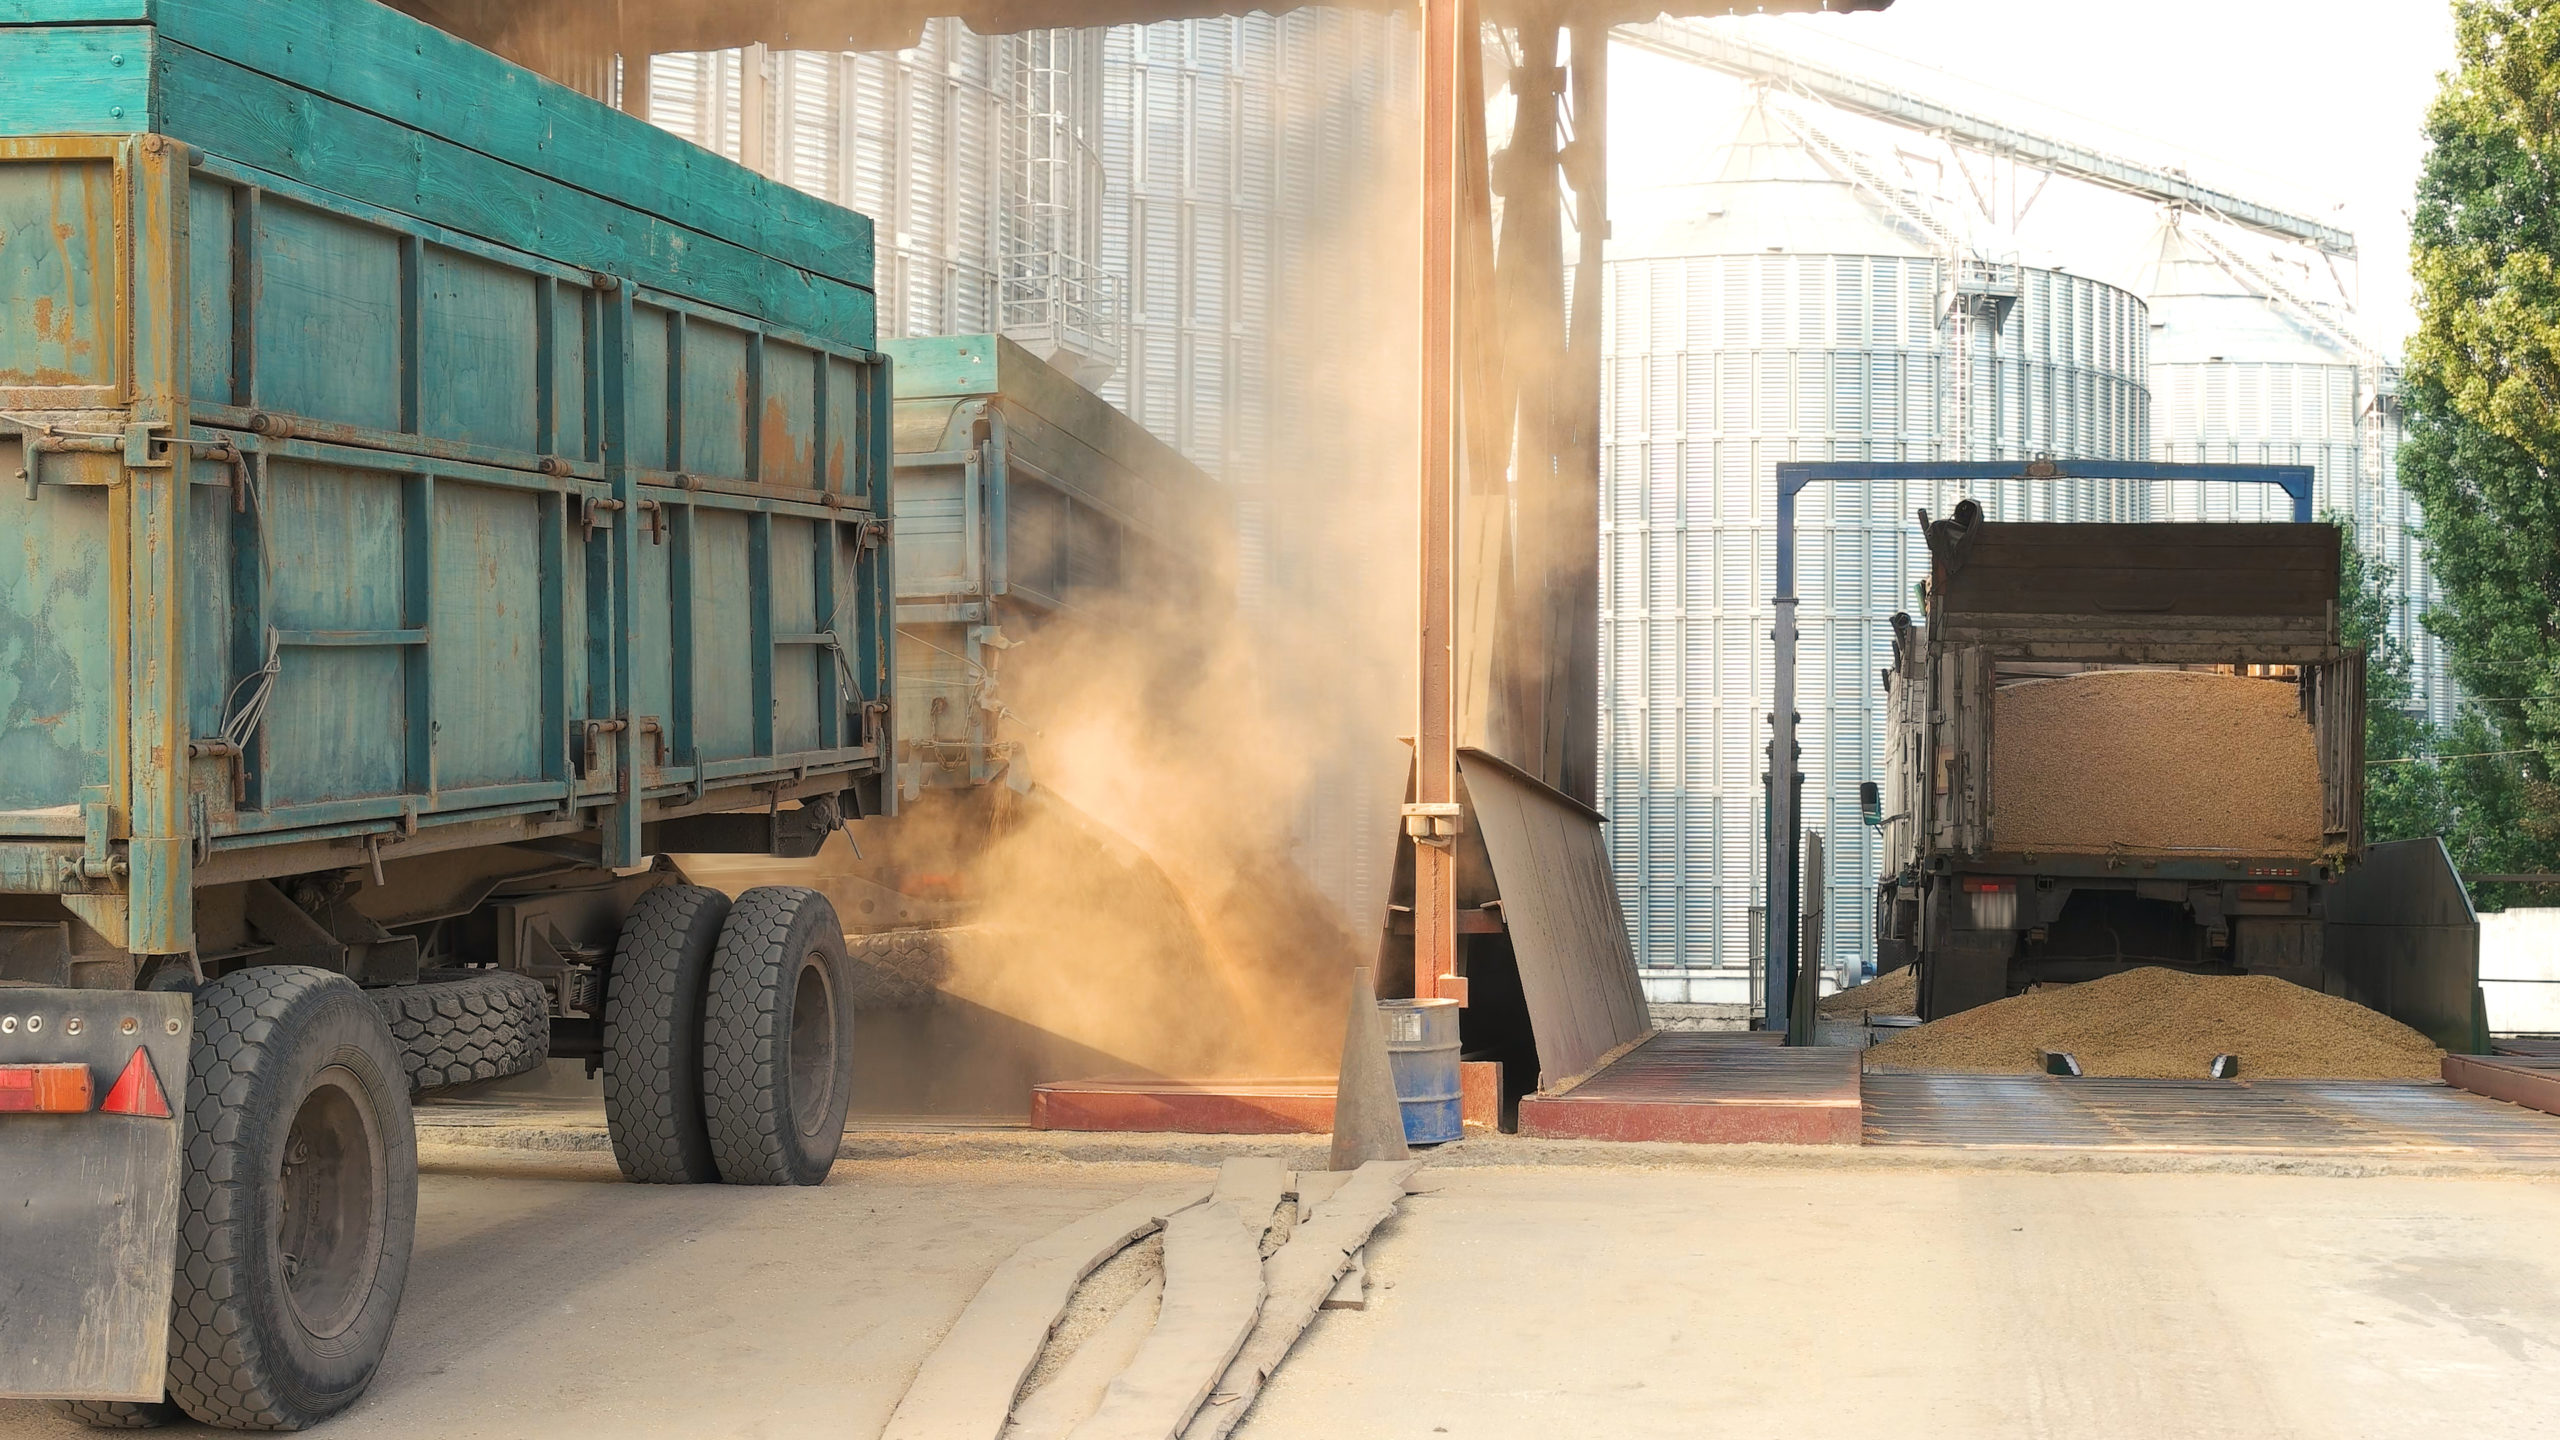 Trucks dumping grain in a warehouse after harvest.